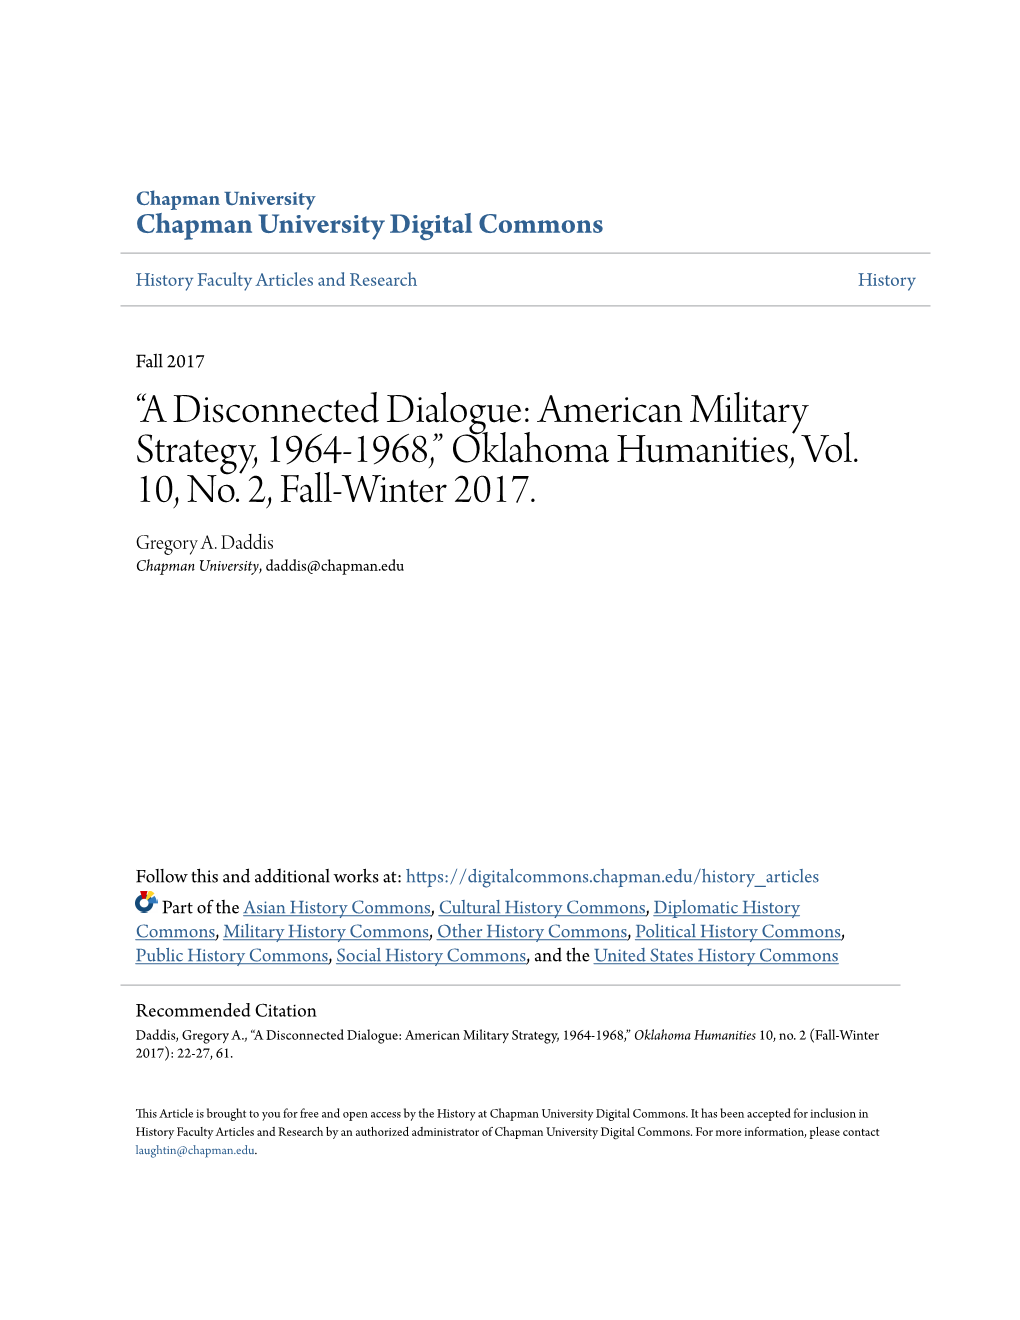 “A Disconnected Dialogue: American Military Strategy, 1964-1968,” Oklahoma Humanities, Vol